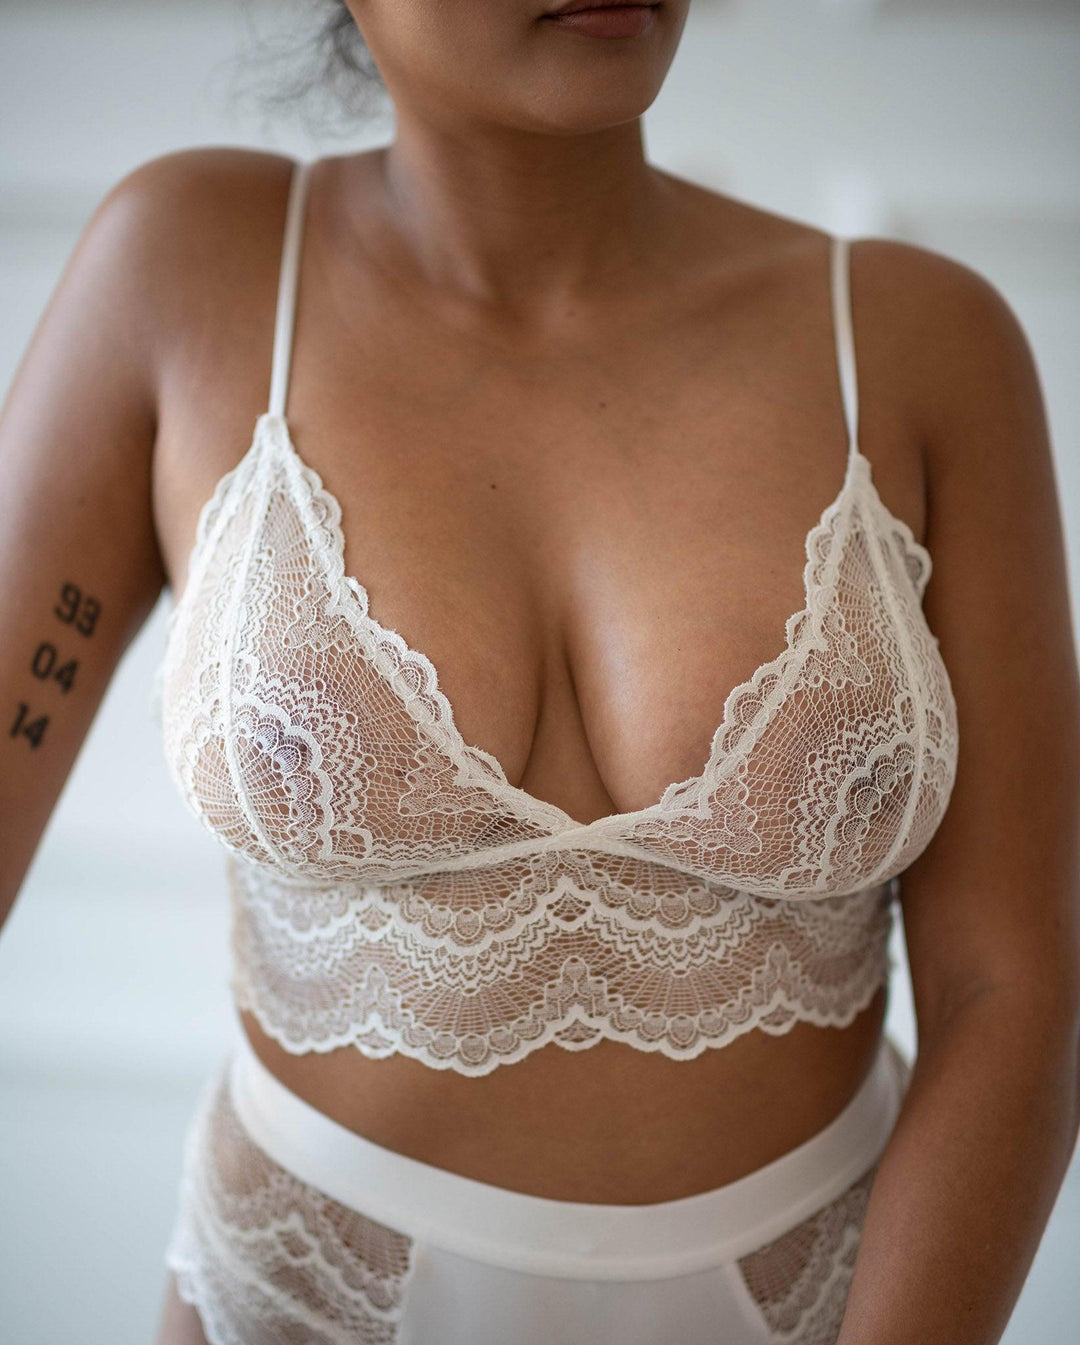 White Lace Breast Bandage See Through Bralette For Women Erotic